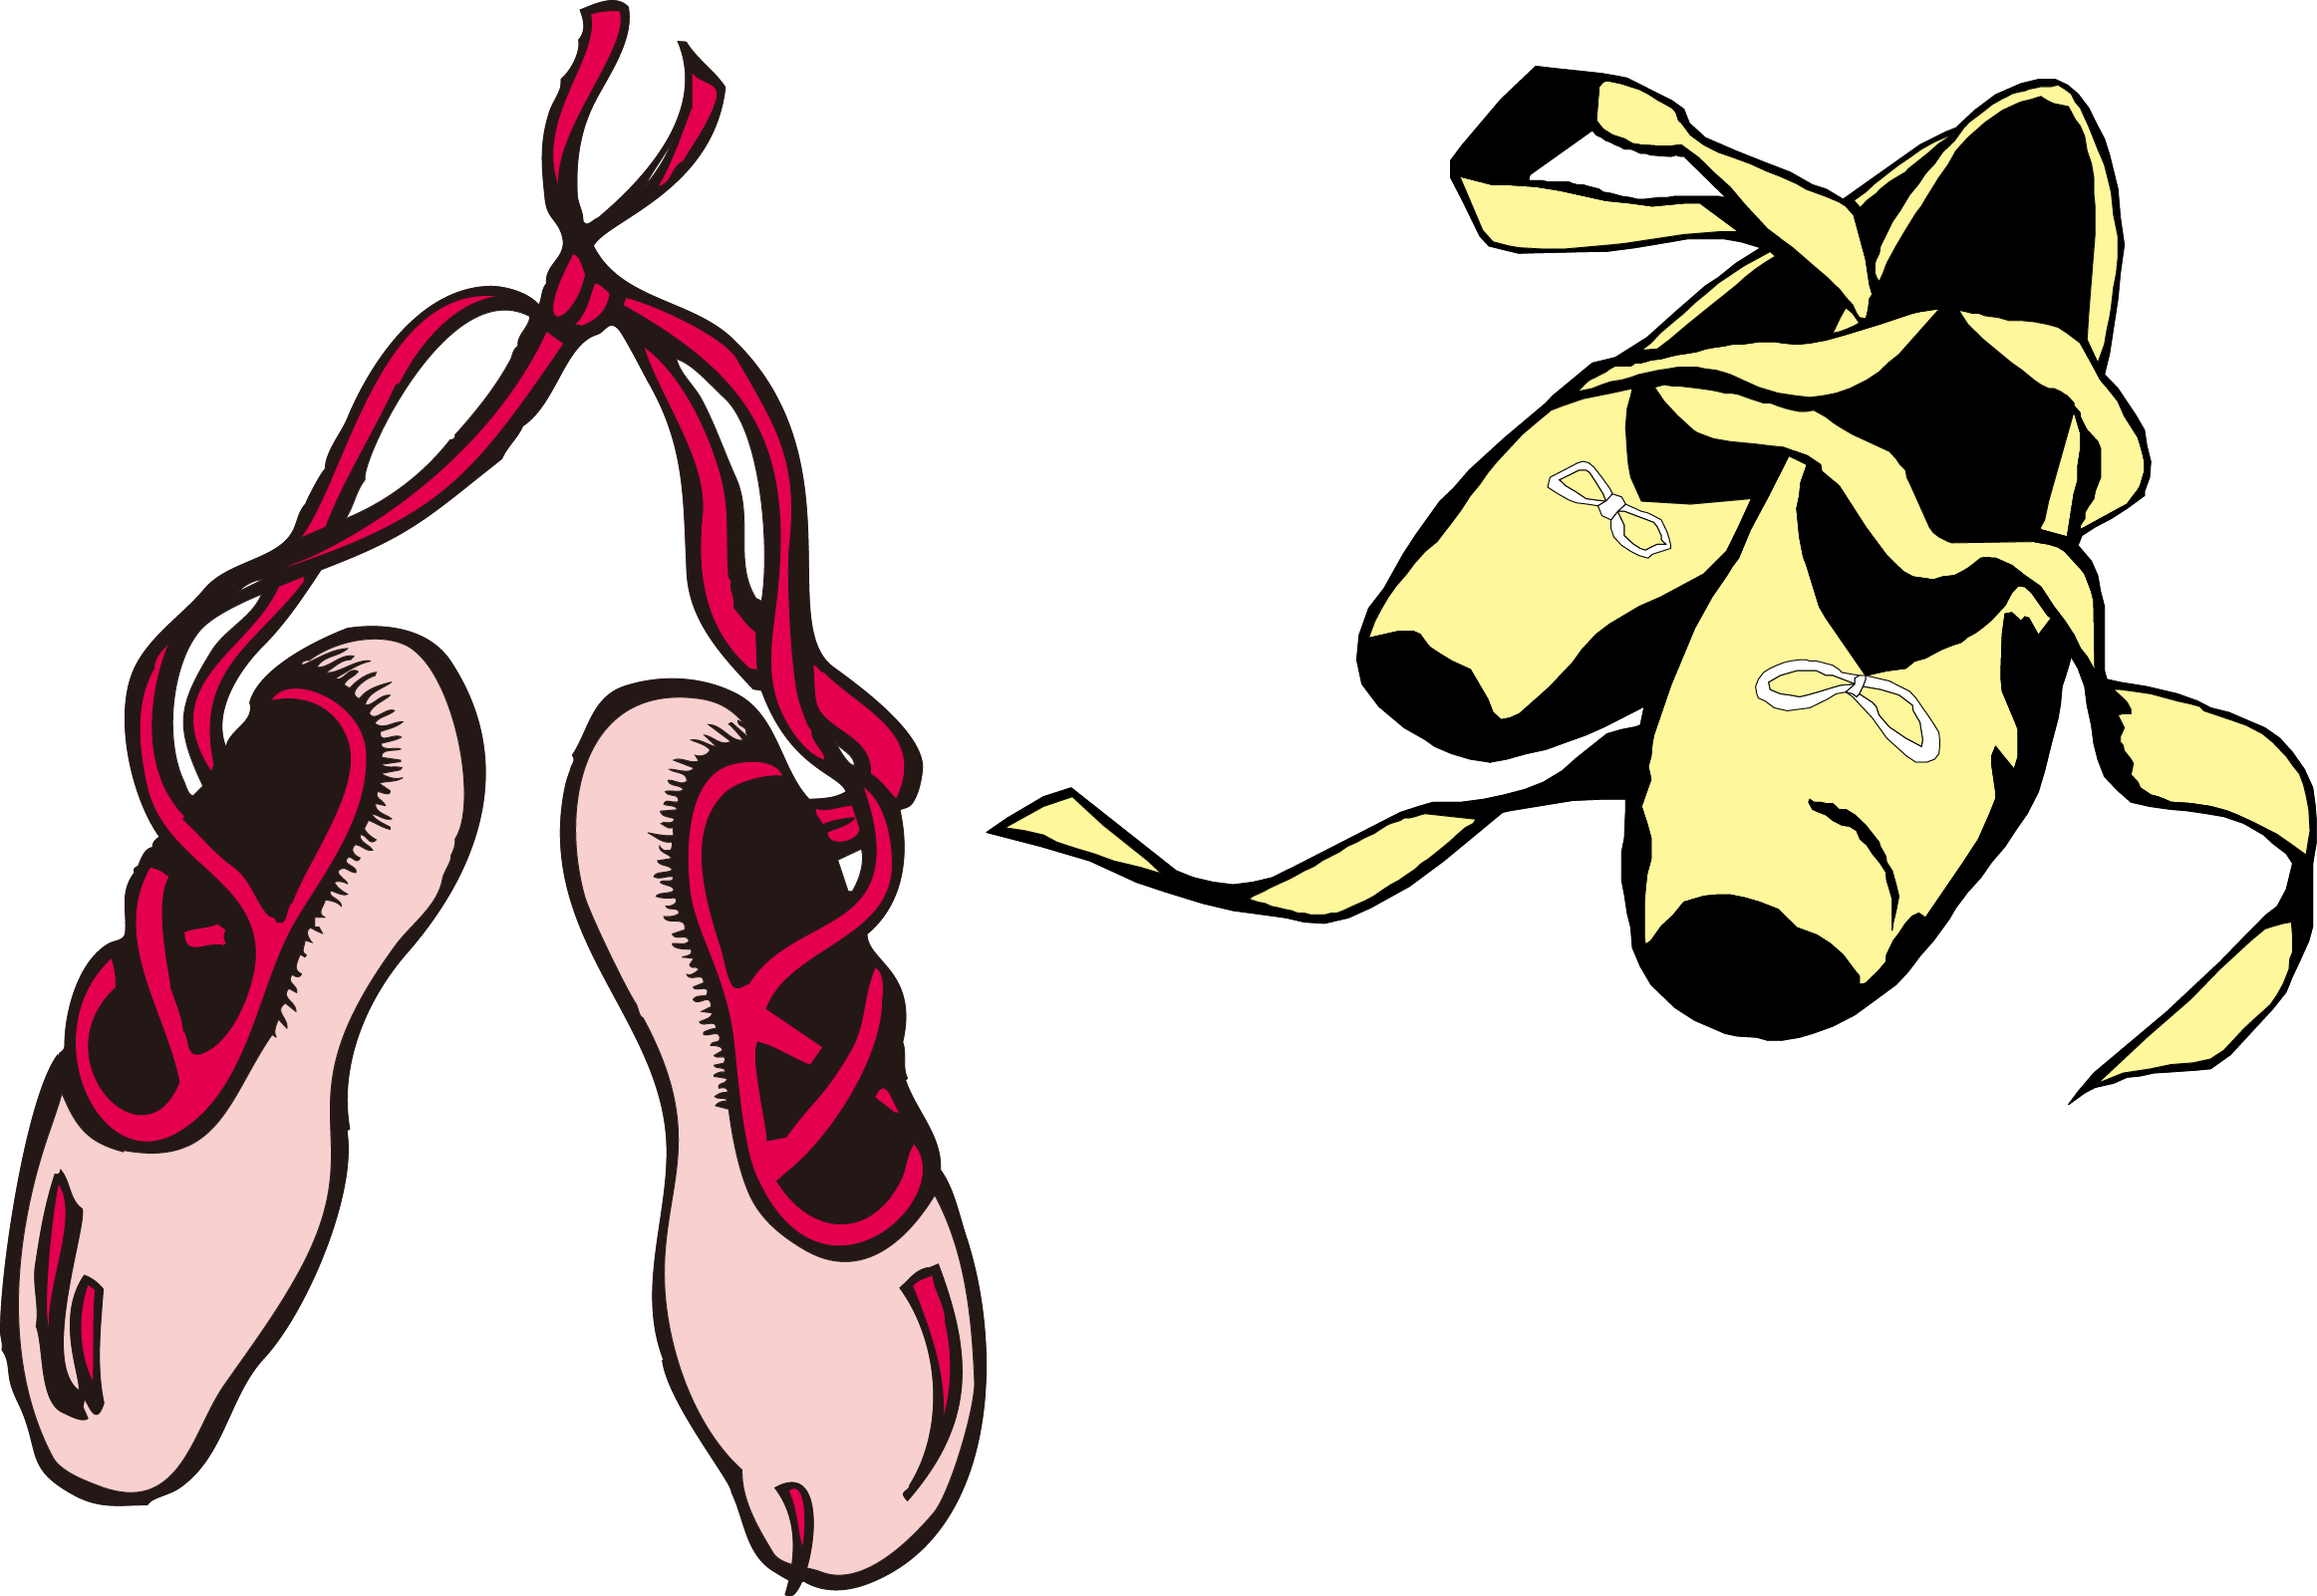 Download and share clipart about Ballet Shoe Dance - Dance, Find more high ...